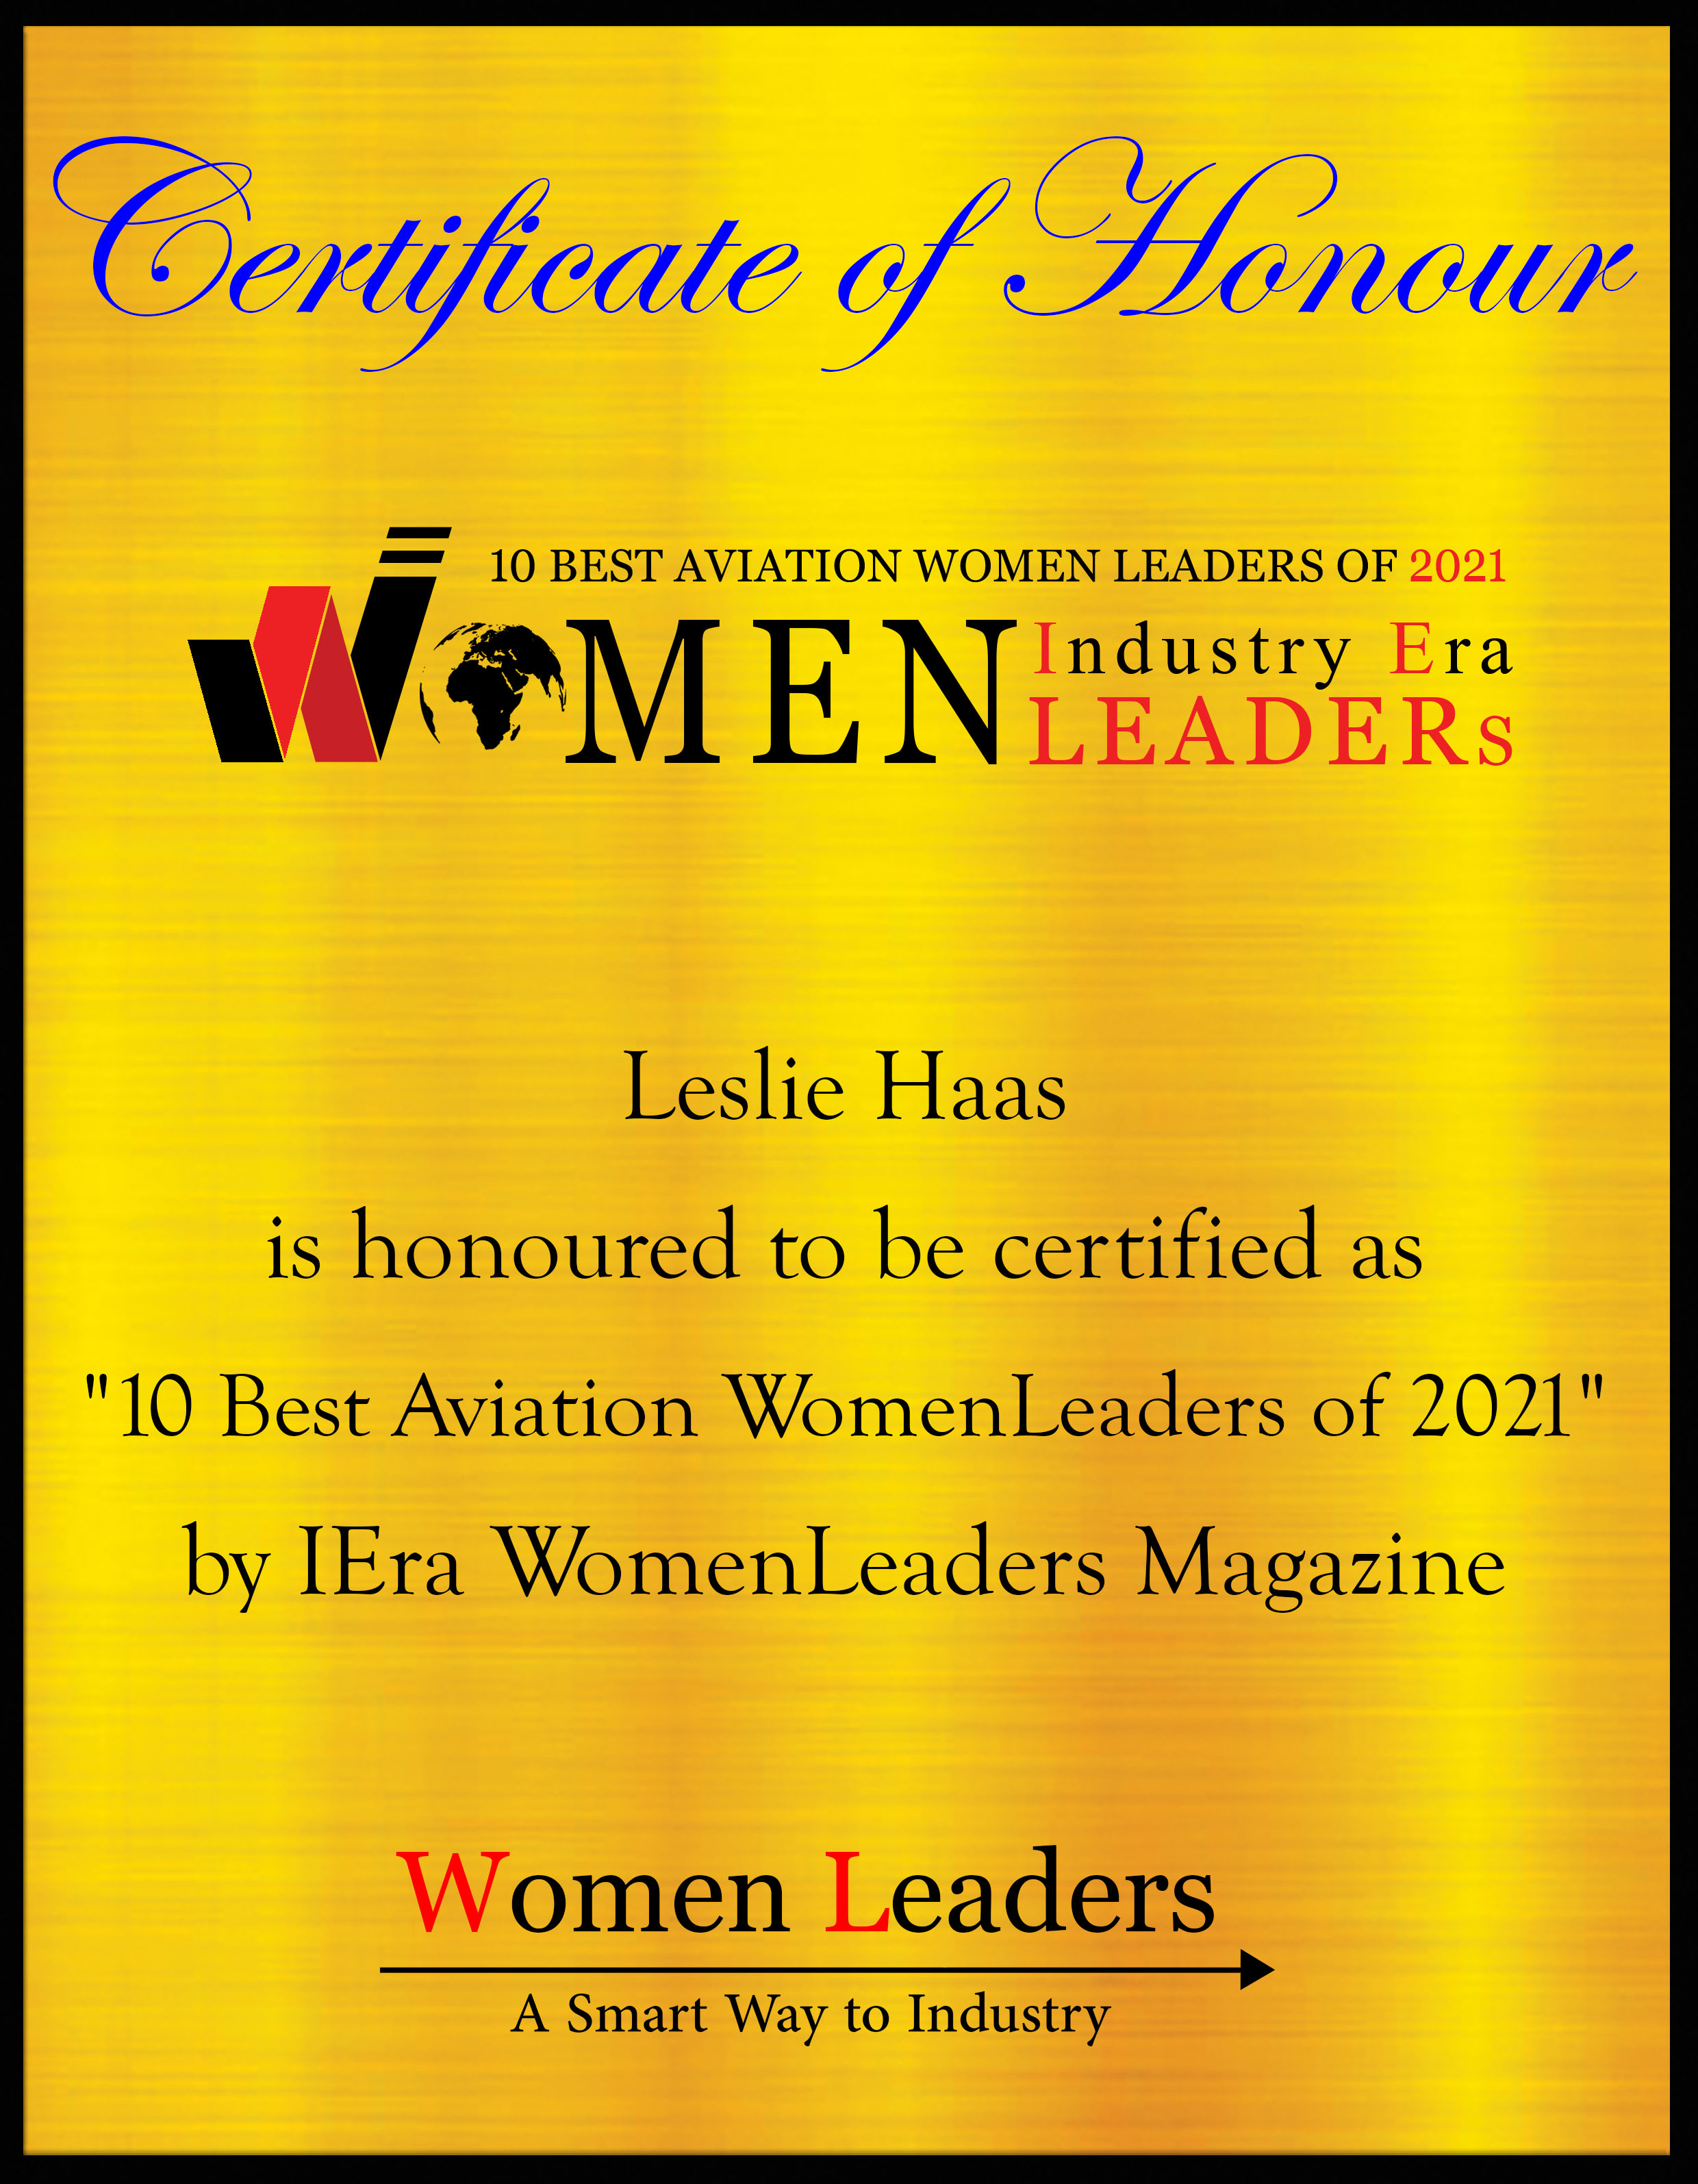 Leslie Haas Director of Business Development at Paragon Space Development, Most Aviation WomenLeaders of 2021